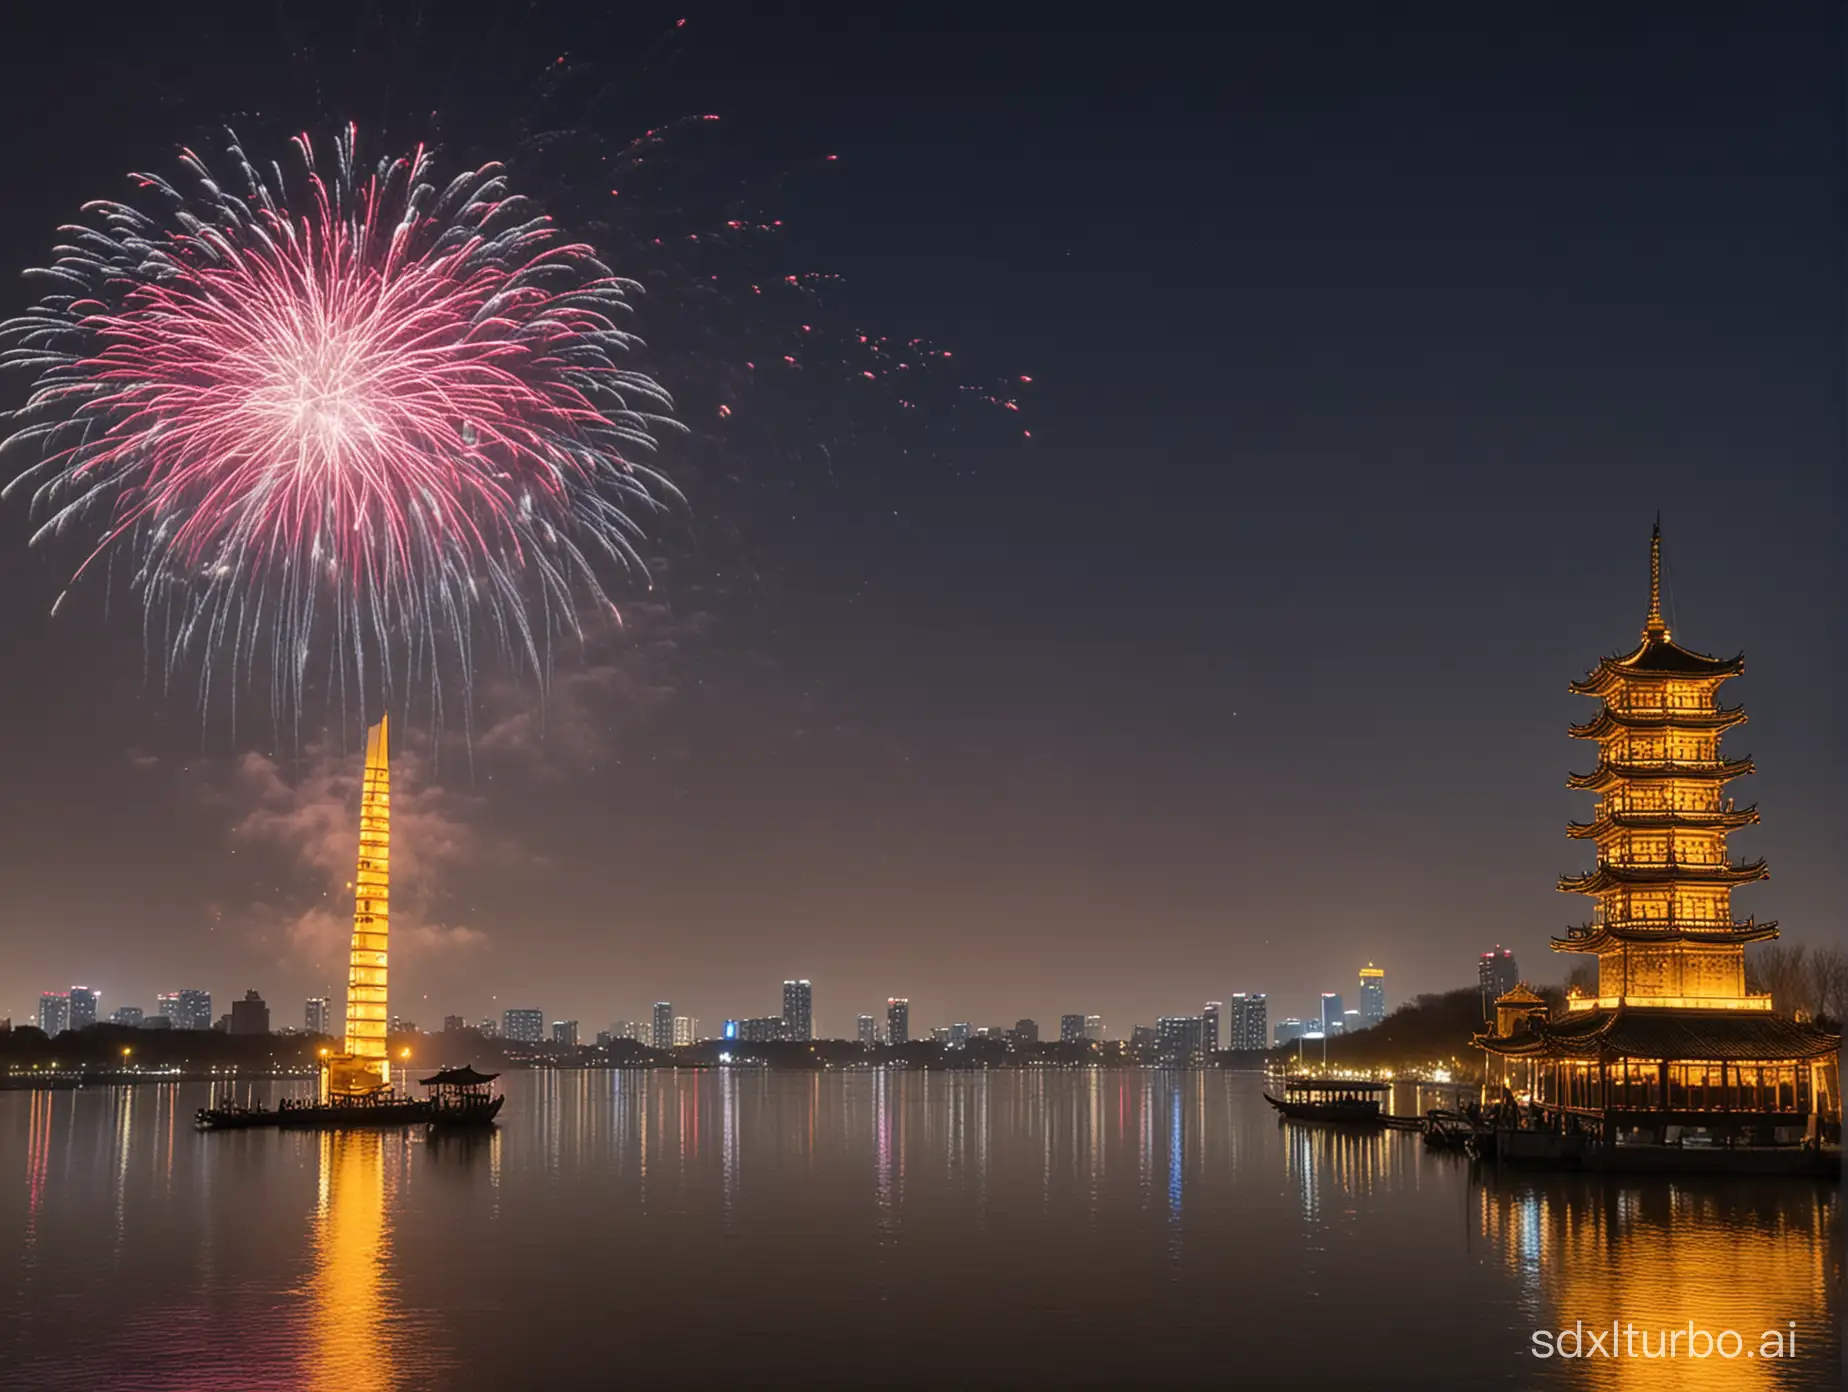 An old friend bids farewell to Yellow Crane Tower in the west, fireworks falling over Yangzhou in March. The lone sail disappears into the distant blue sky, only the sight of the Yangtze River flowing into the horizon.